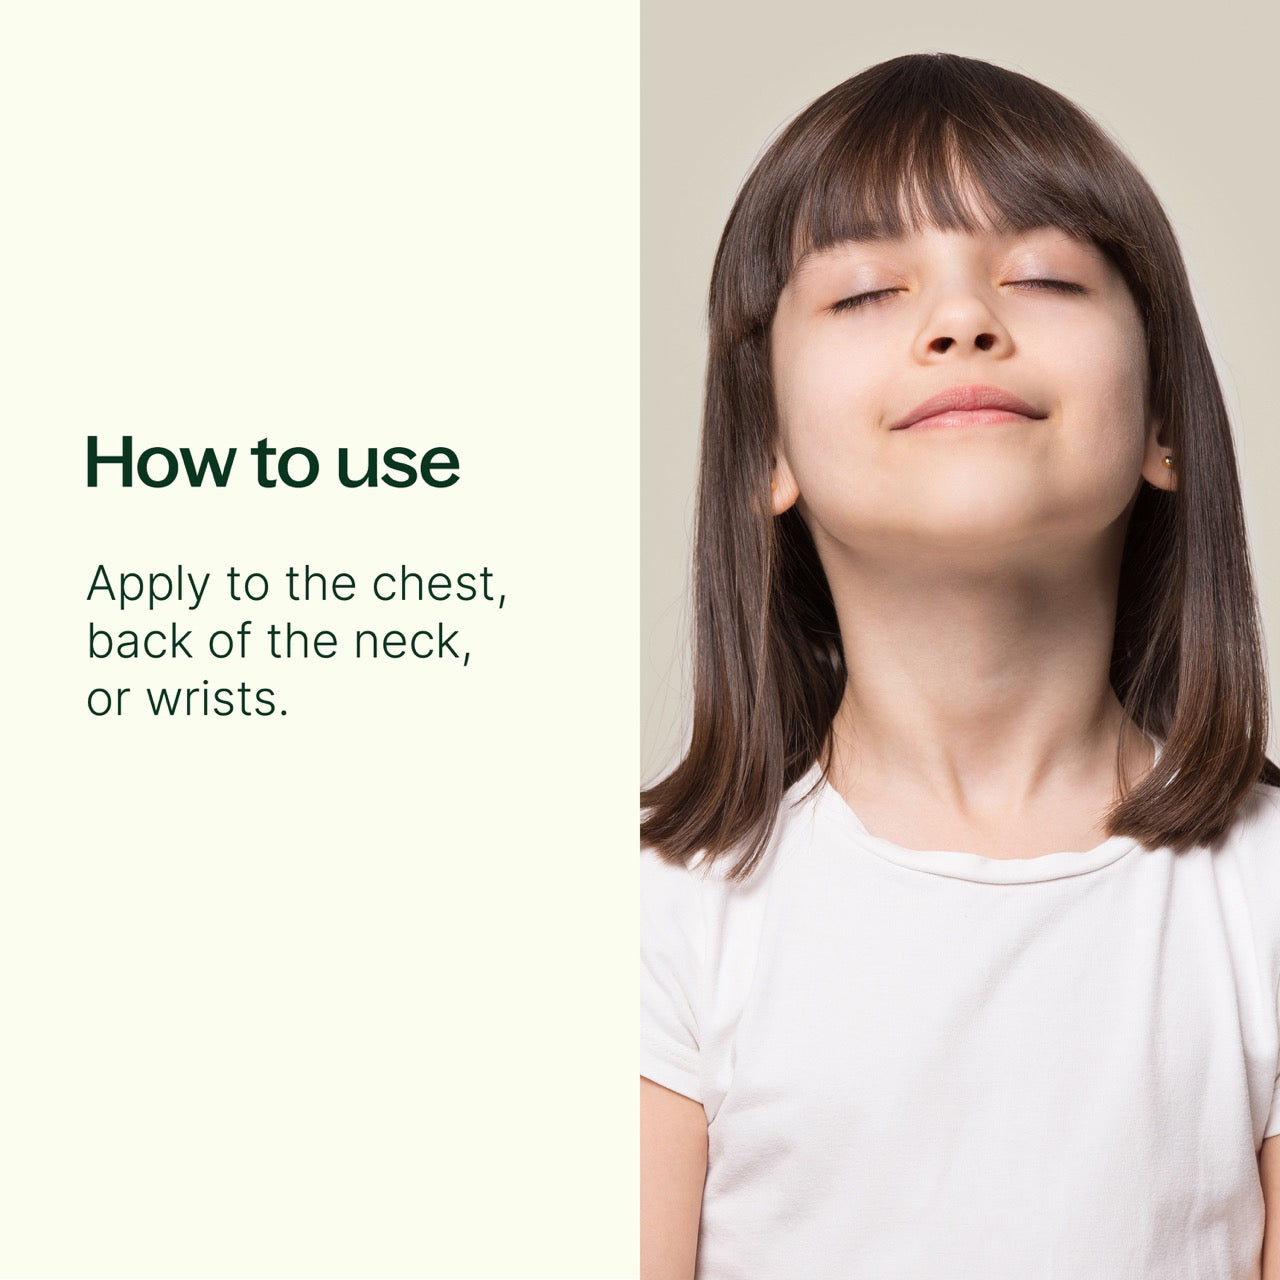 How to Use Study Time KidSafe Essential Oil Pre-Diluted Roll-On: Apply to the chest, back of the neck, or wrists.